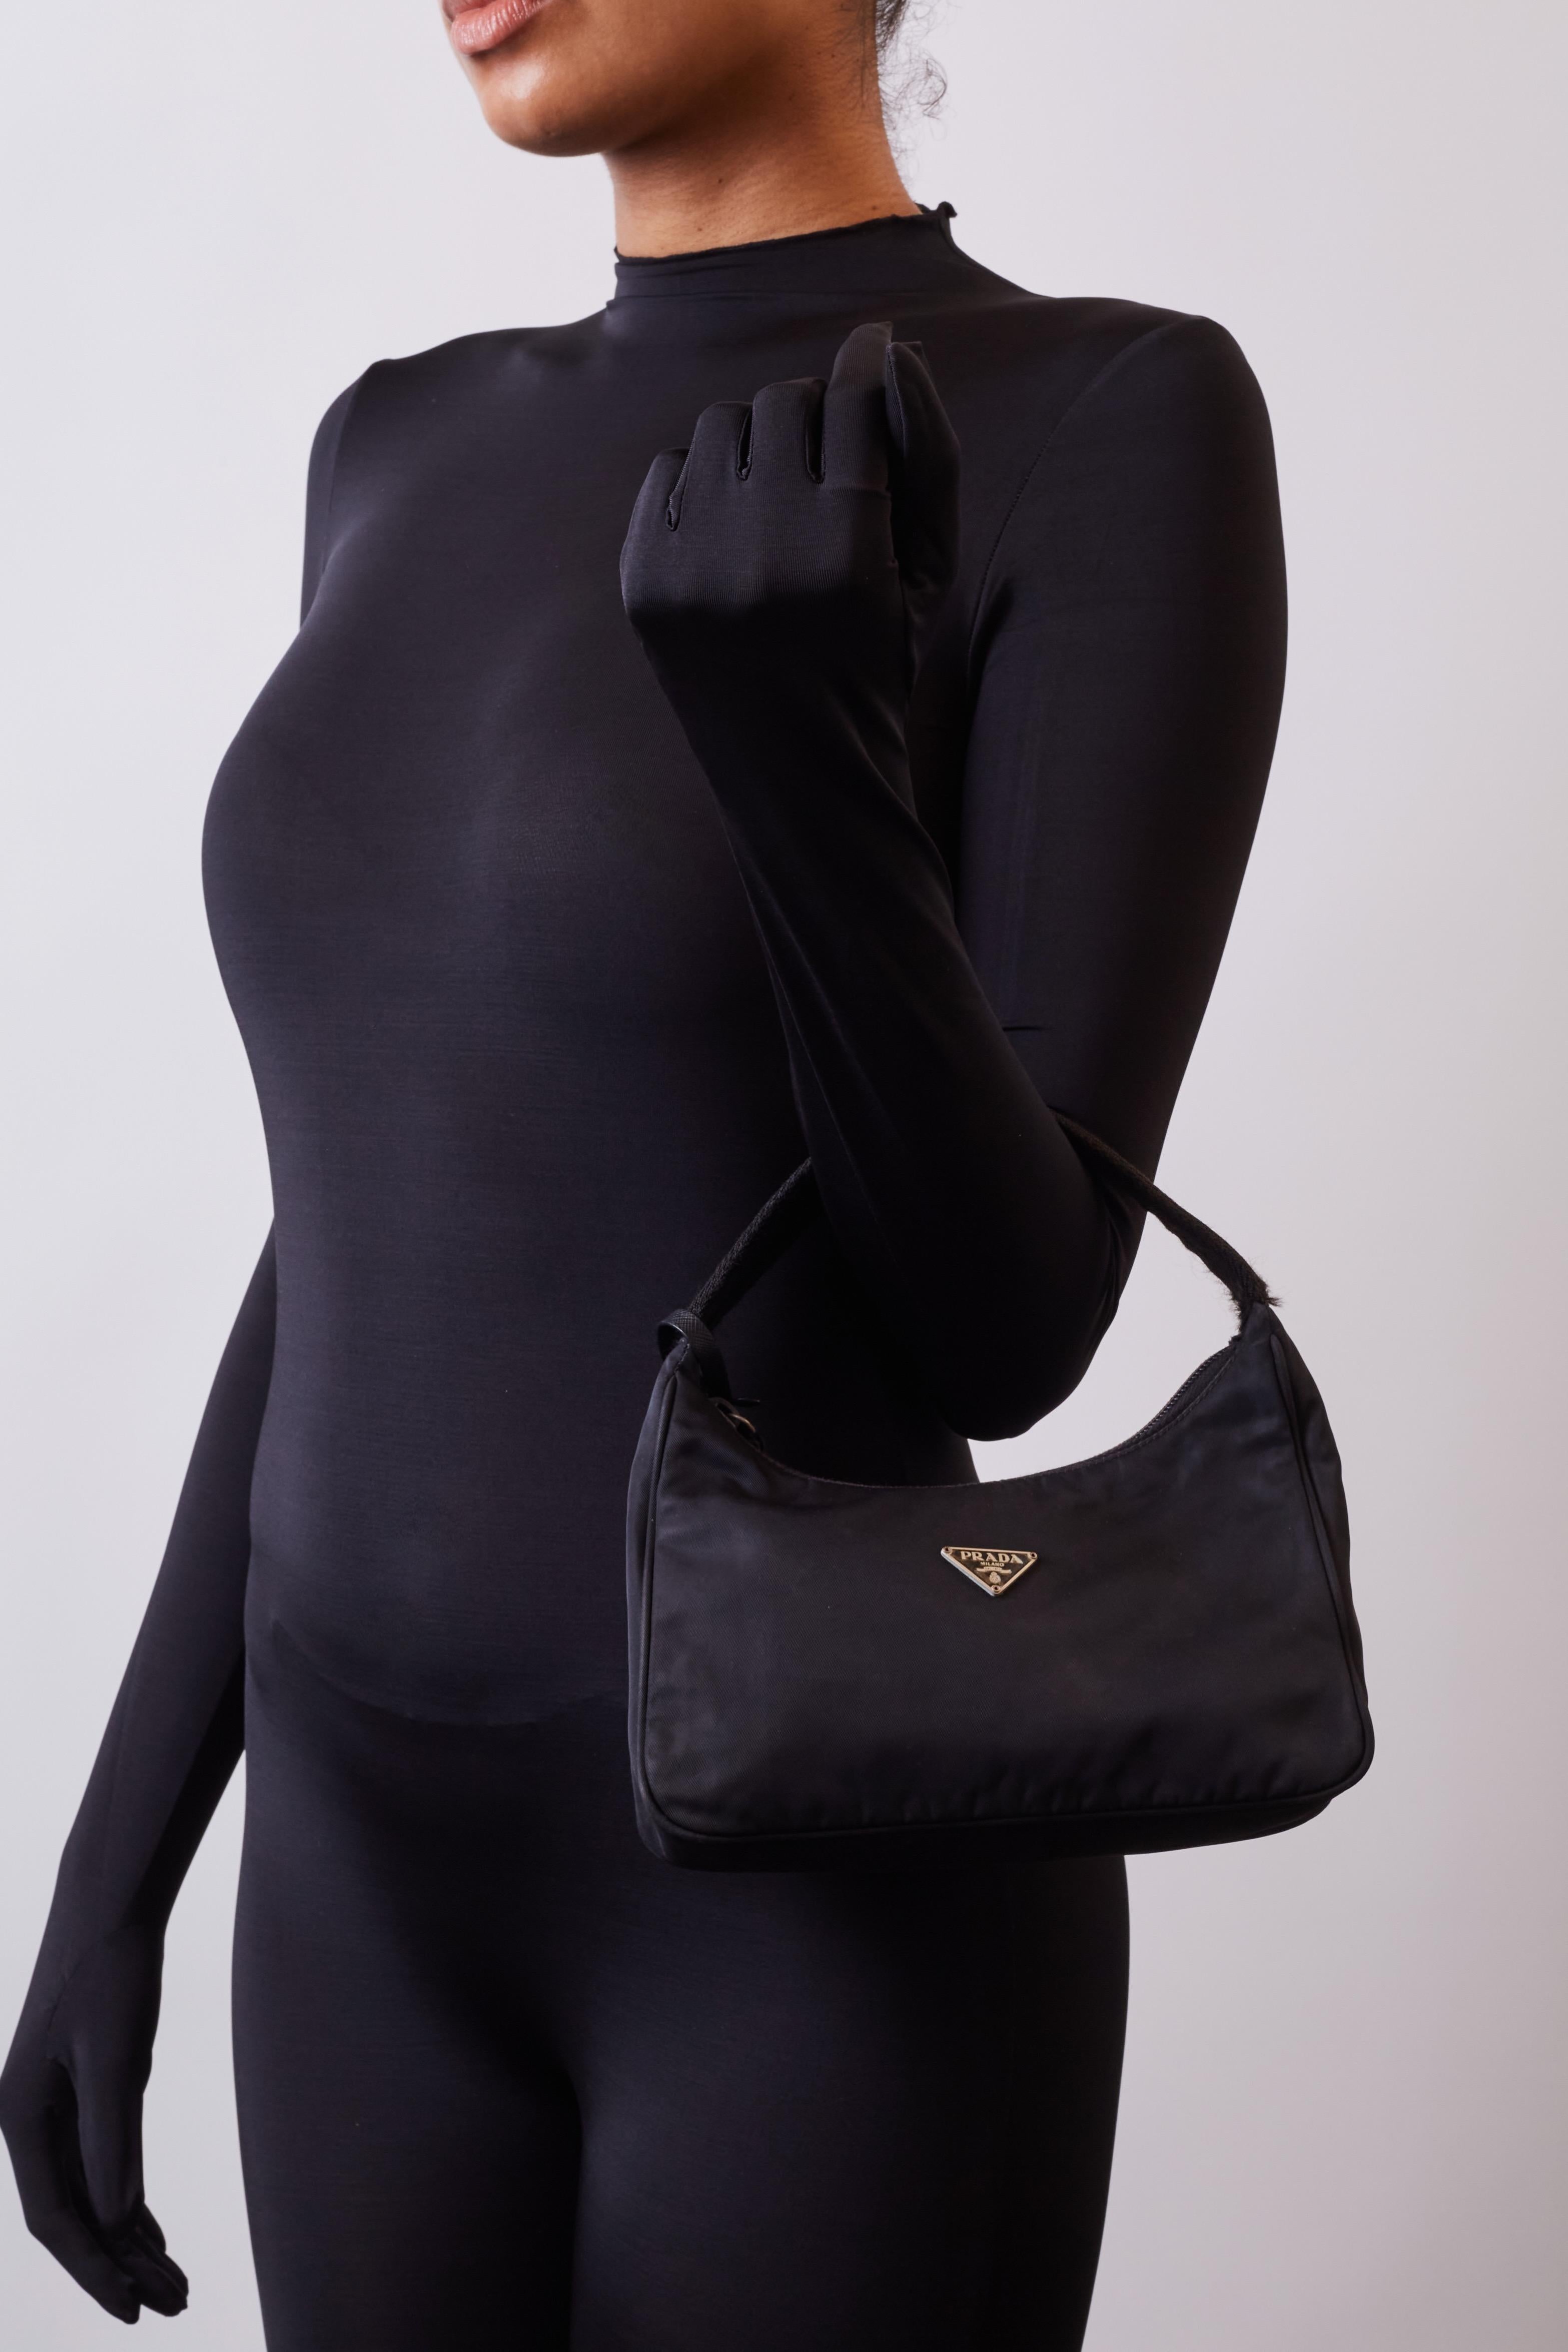 This bag tote is made of black nylon fabric. The shoulder bag features a polished silver tone enameled black Prada logo on the front, a tall black durable nylon shoulder strap, and a broad zipper top opening. The top zipper opens to a matching nylon